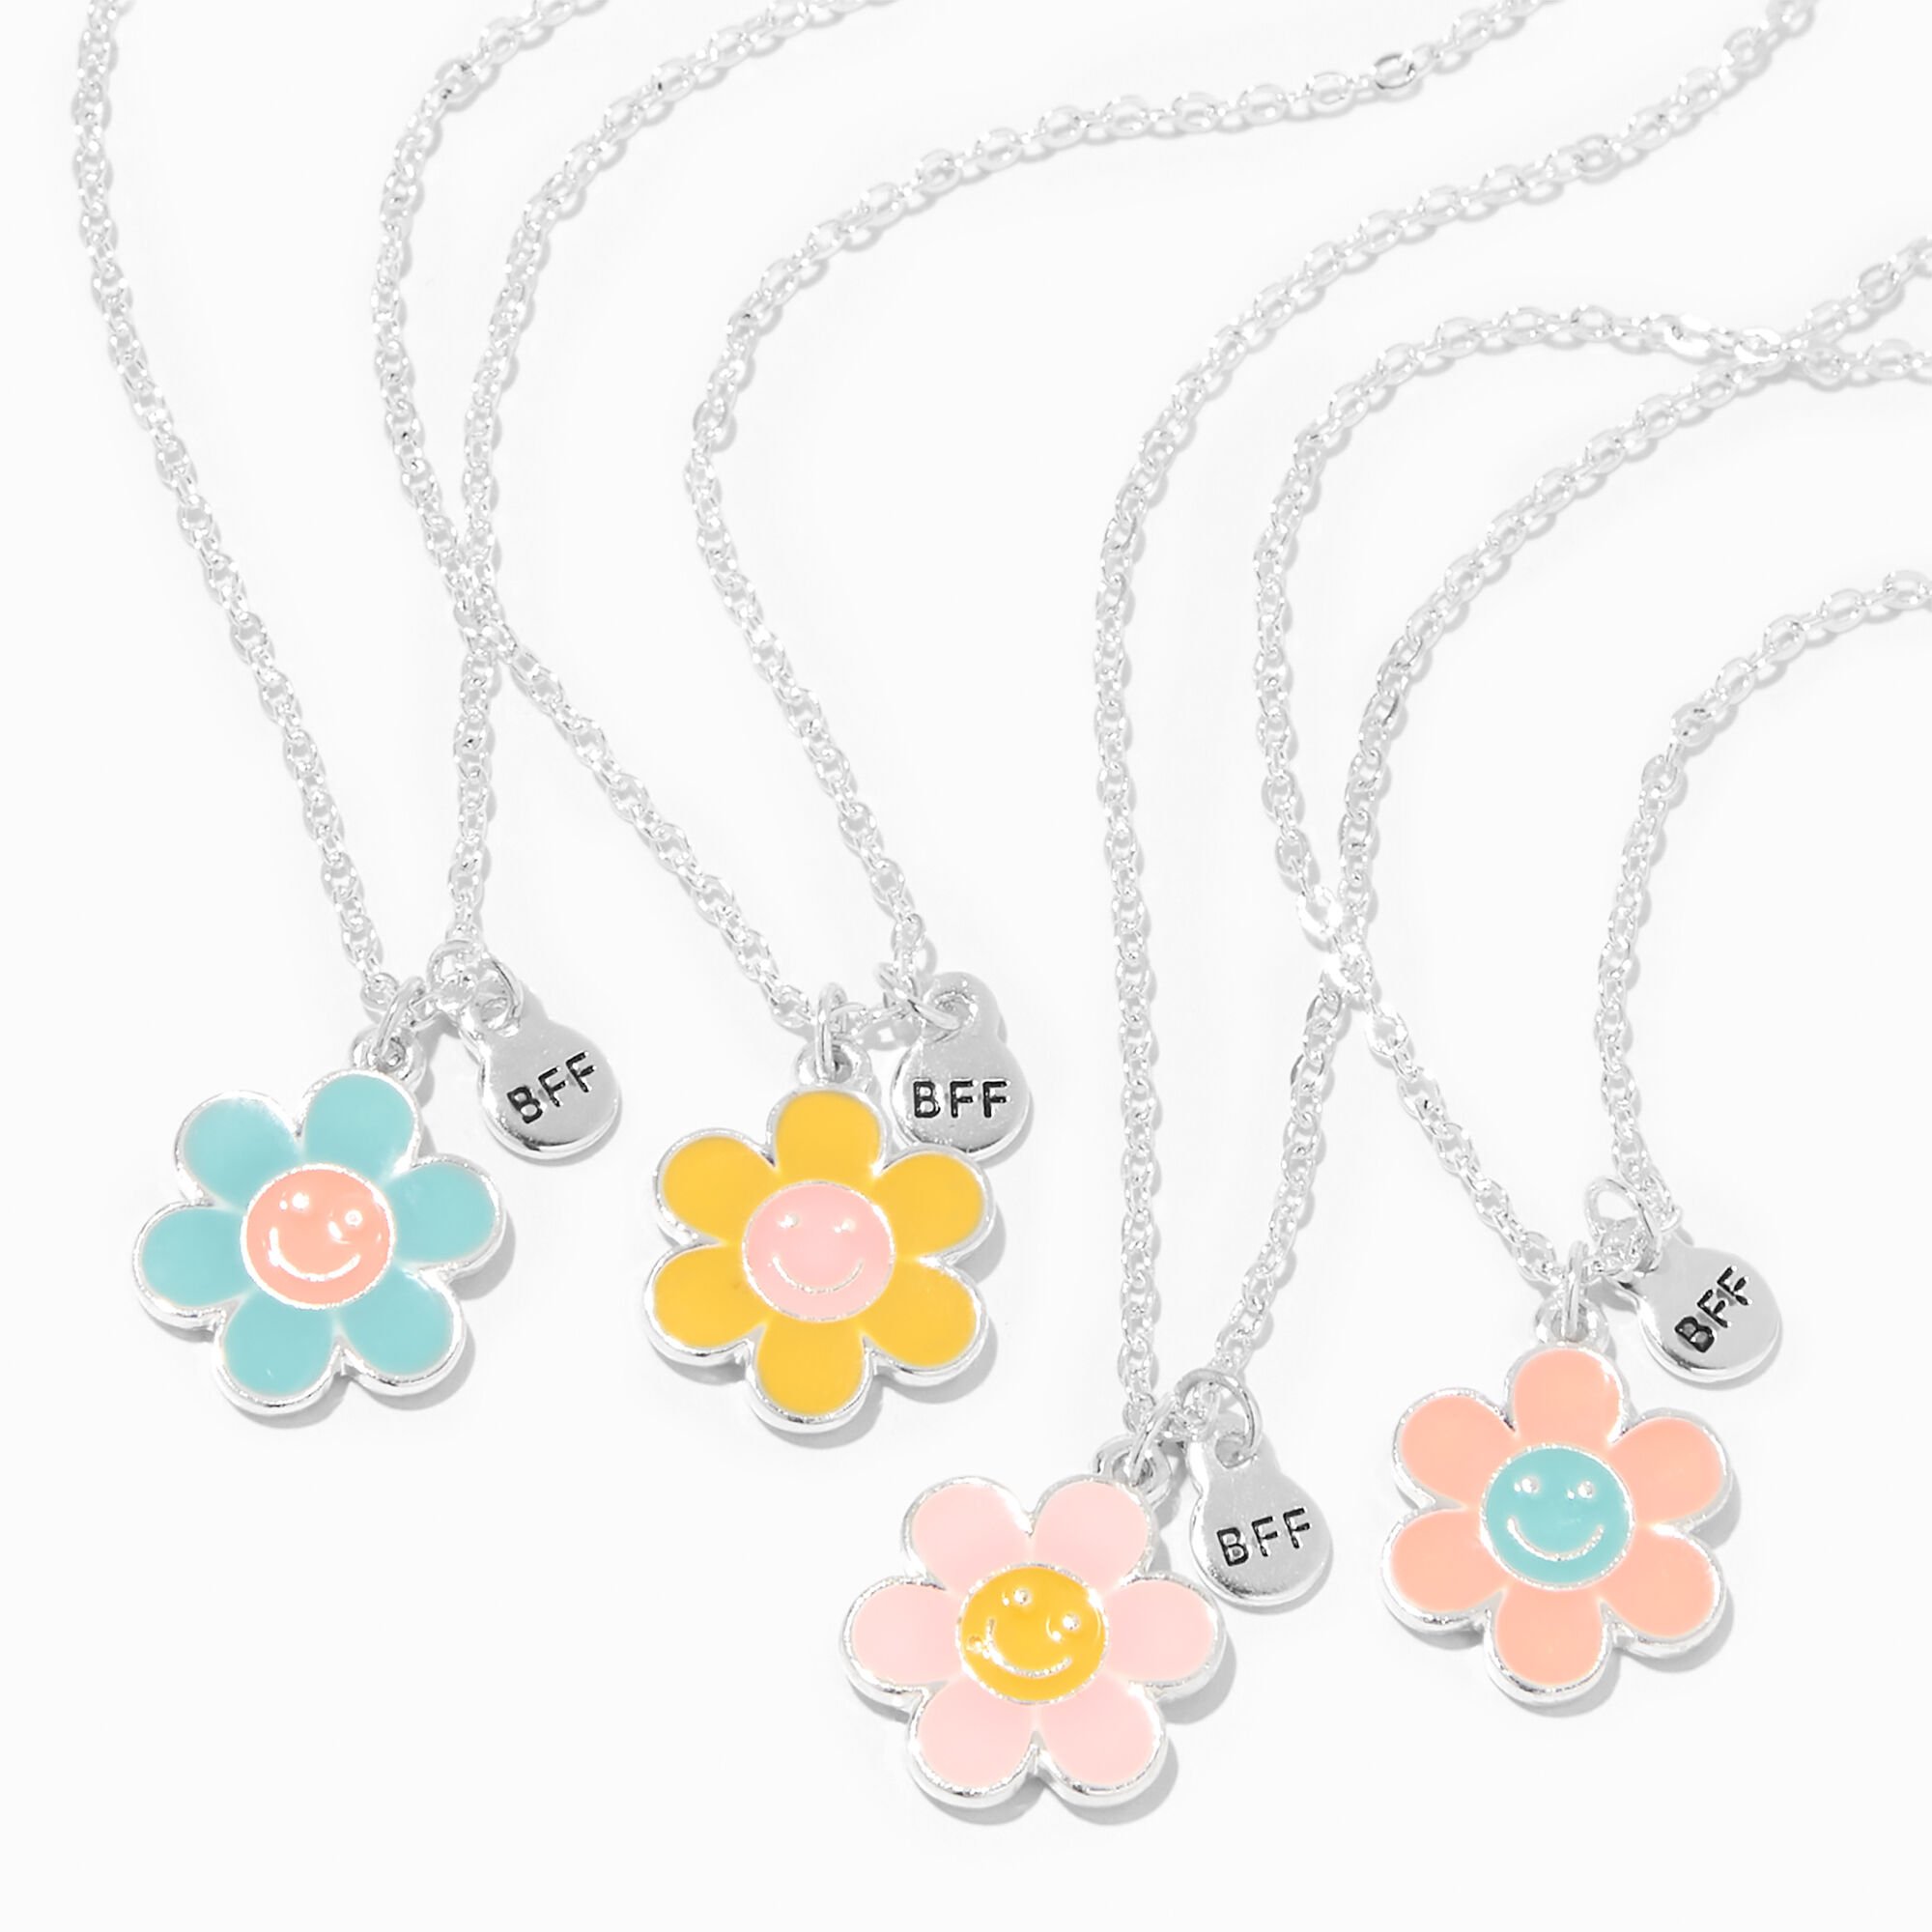 View Claires Tone Best Friends Happy Daisy Pendant Necklaces 4 Pack Silver information